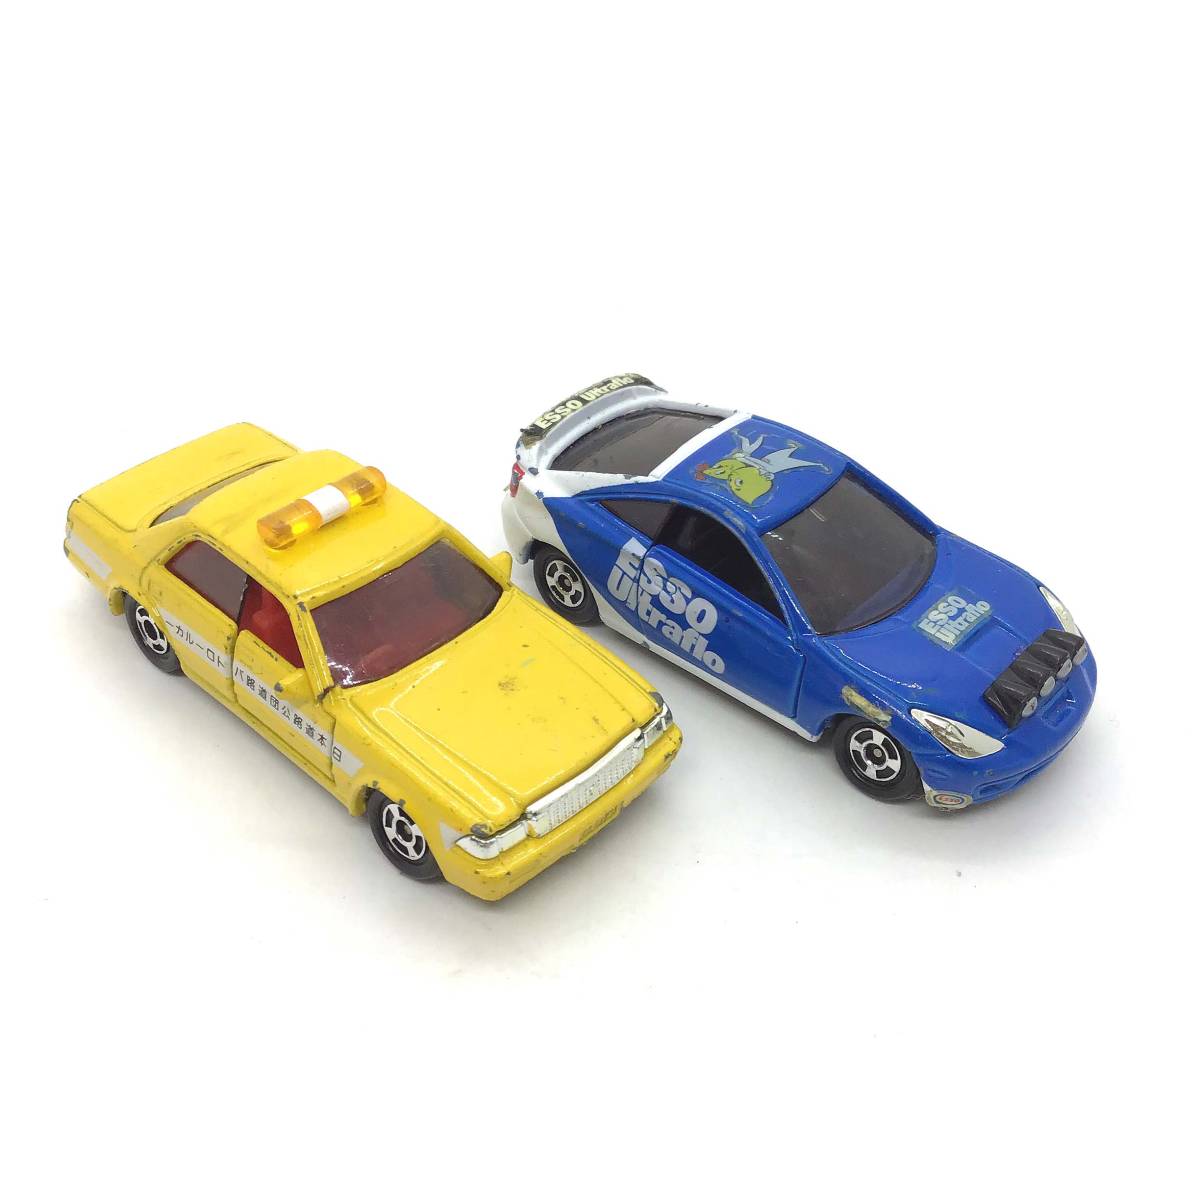 CL【tomica】TOYOTA CROWN No.55 CELICA No.96 2台セット トミカ コレクション ミニカー おもちゃ 玩具 トヨタ_画像1